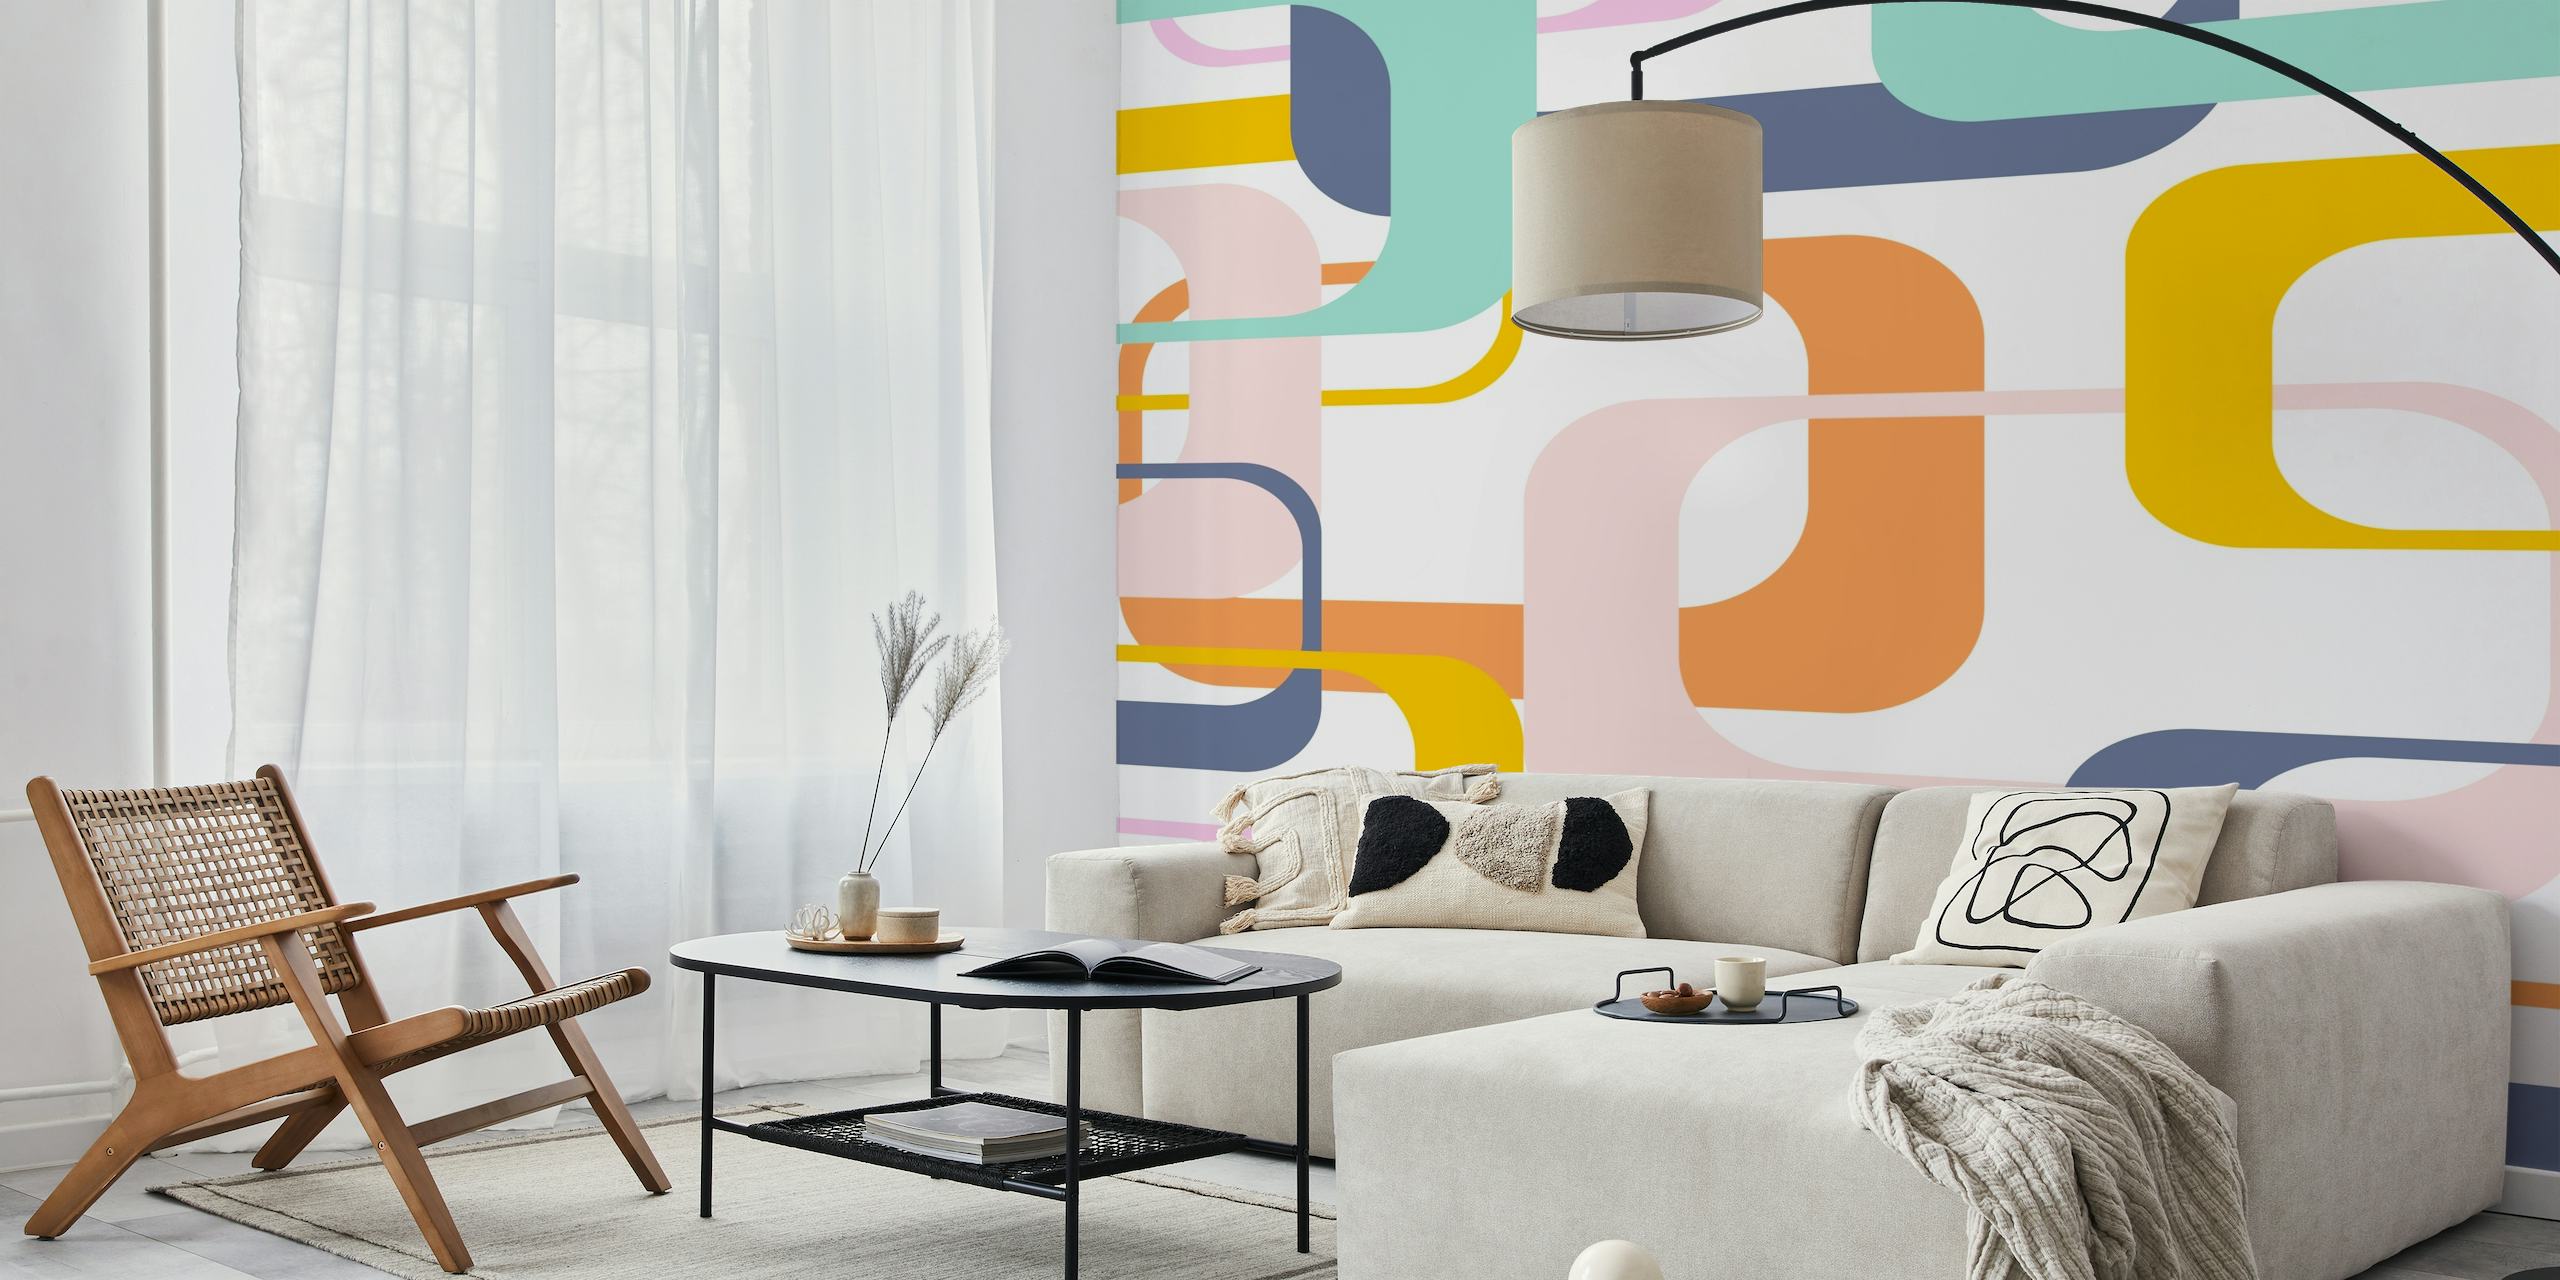 Colorful geometric shapes wall mural in mid-century modern style